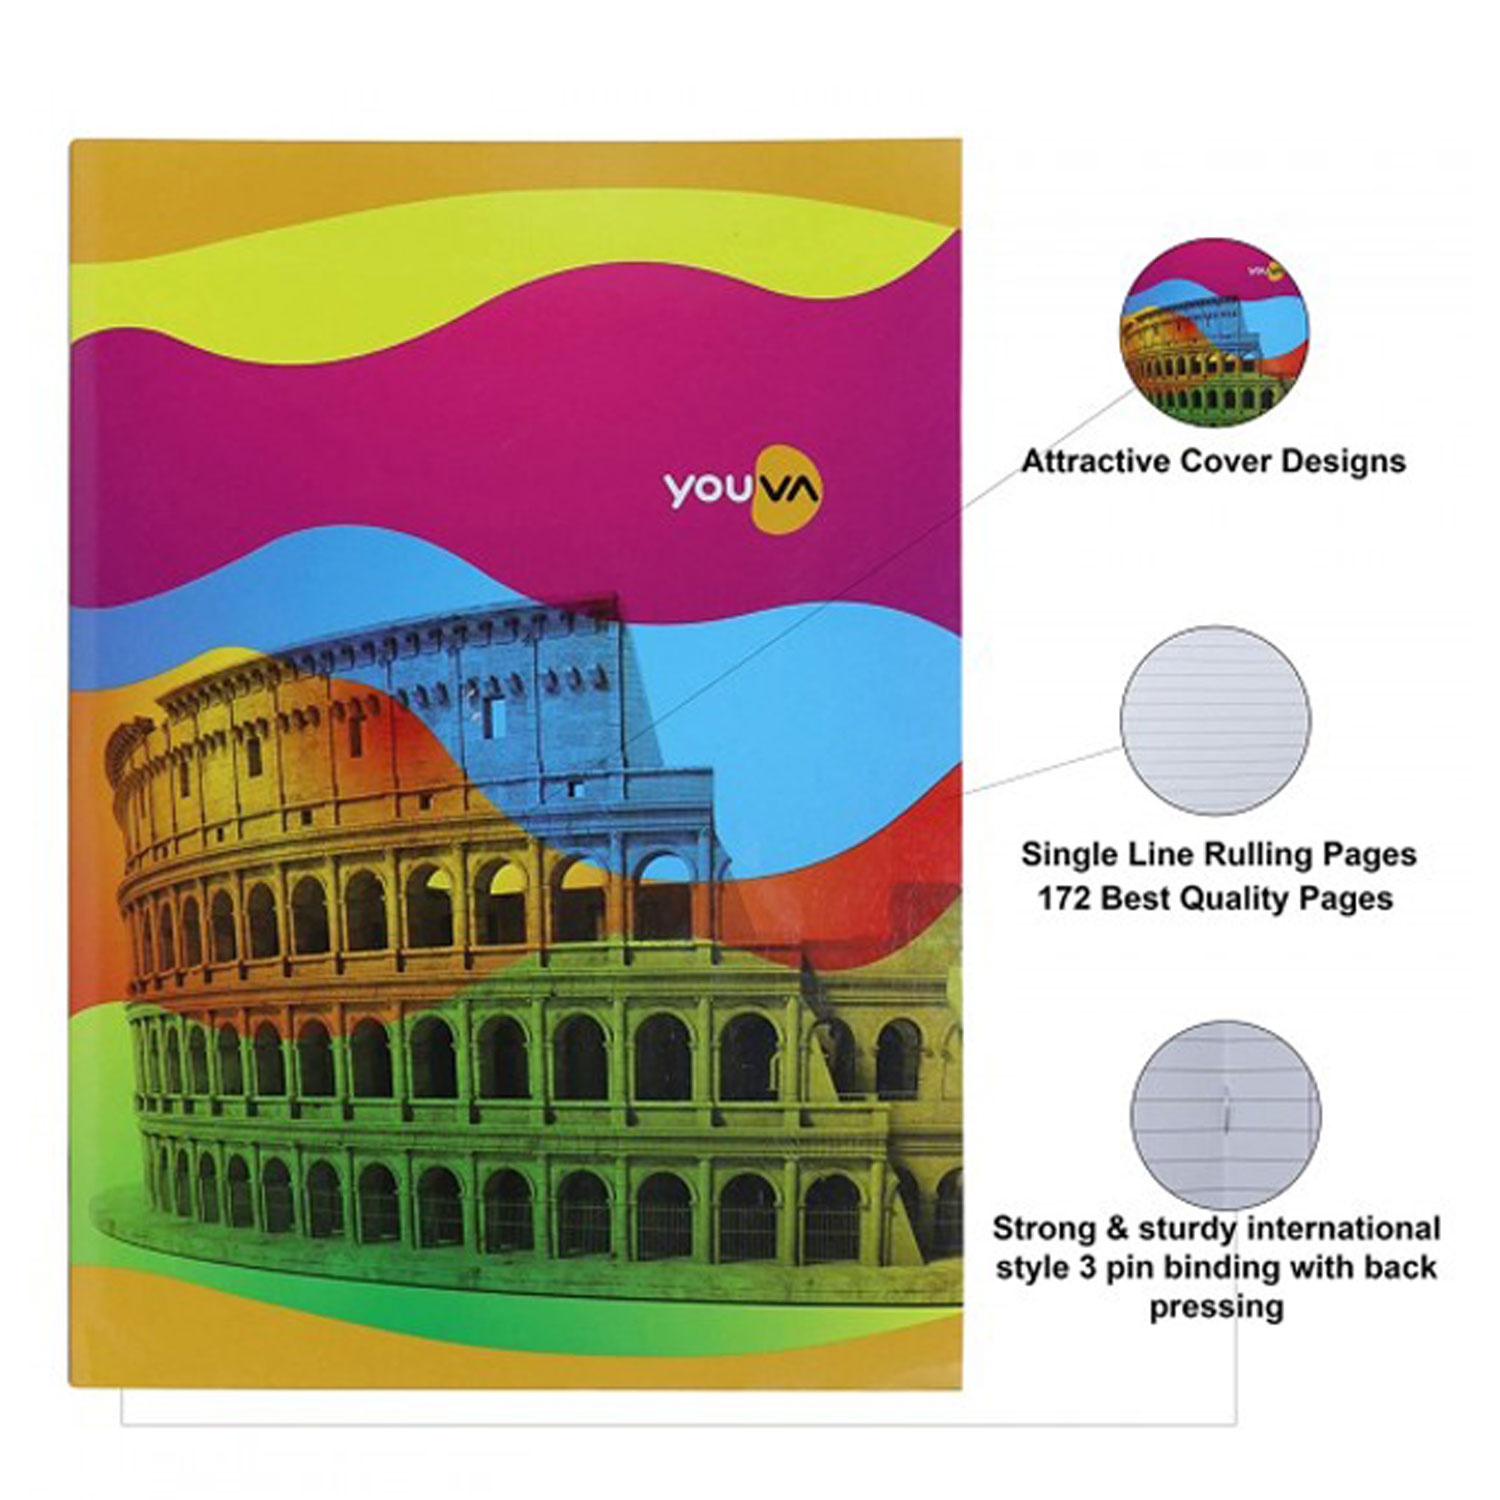 Â Rainbow Design | Soft Bound | Long Book| Single Line | 172 Pages |Youva | VT23352 | Pack of 12